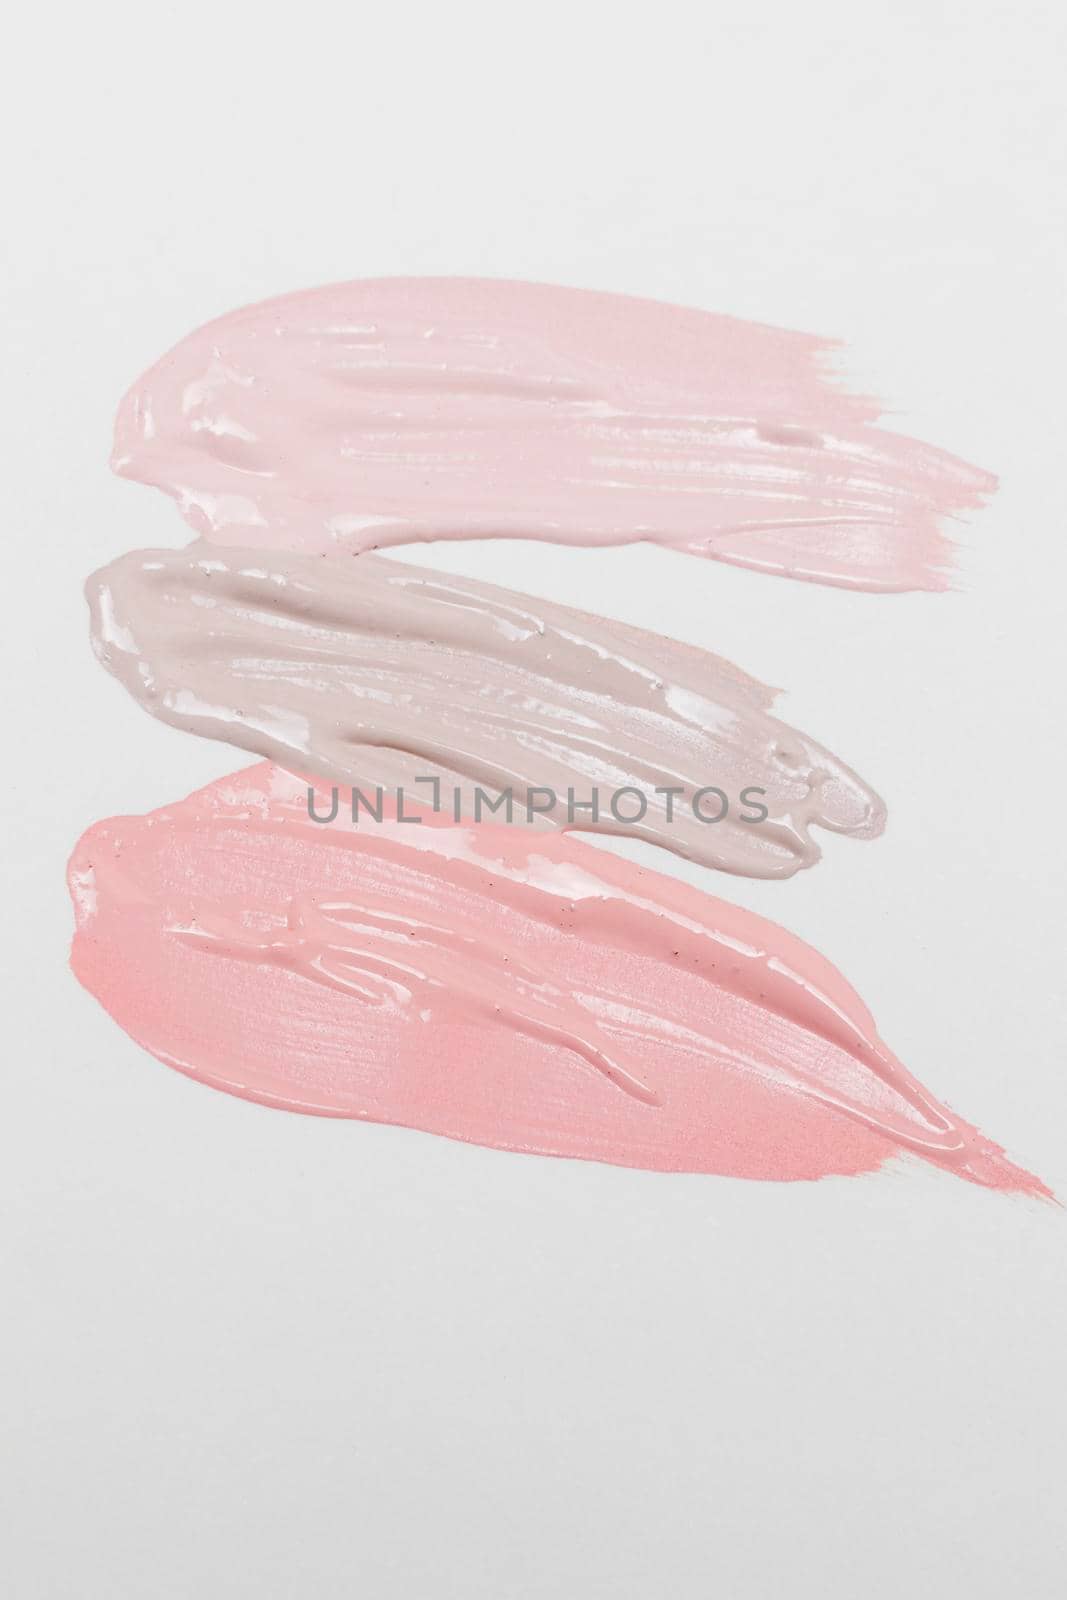 strokes pastel colors lipstick. High quality photo by Zahard